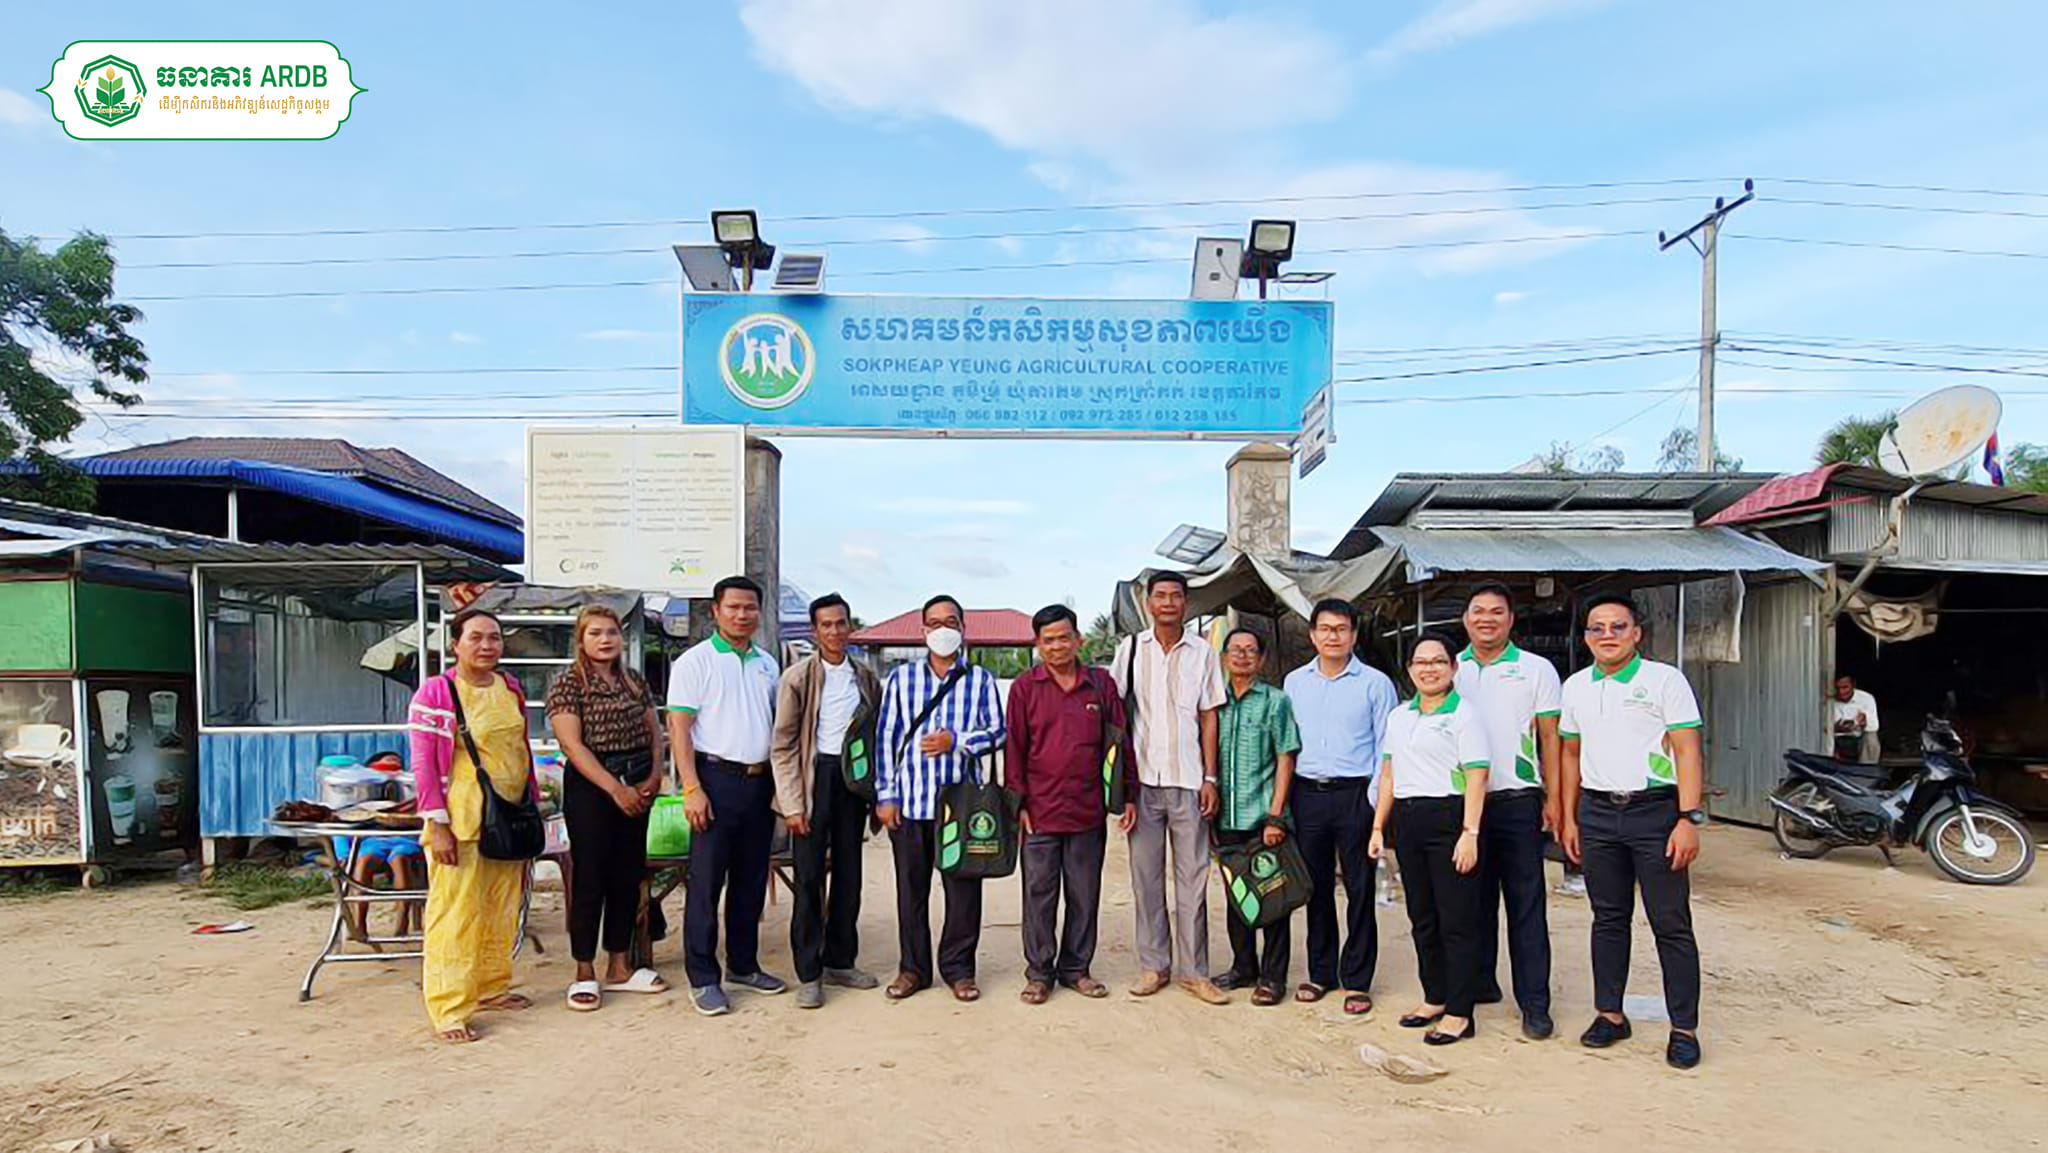 Business development, Marketing and Strategies team with the cooperation Mobile Unit in Takeo province have conducted Agro-entrepreneur program